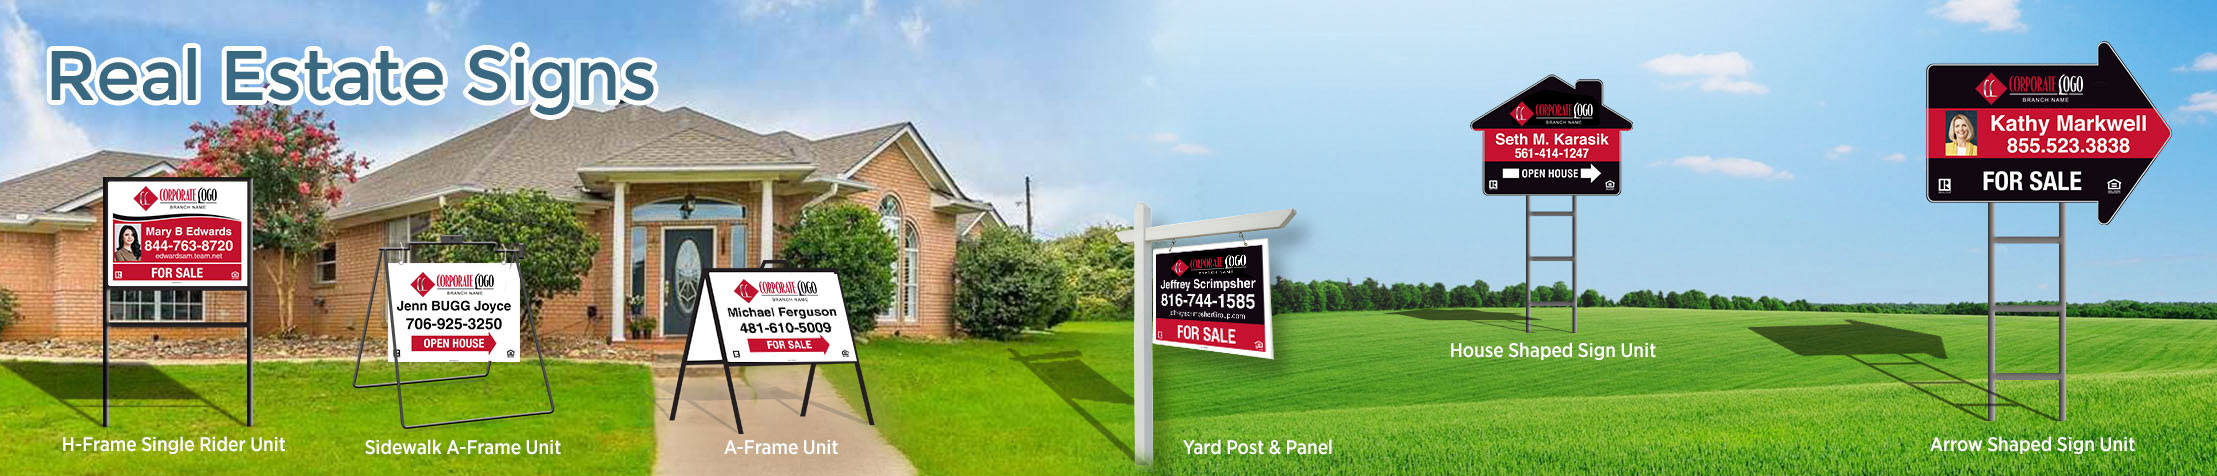 HomeSmart Real Estate Signs - HomeSmart Real Estate signs - H-Frame Units, Directional Signs, A-Frame Units, Yard Post and Panel | BestPrintBuy.com